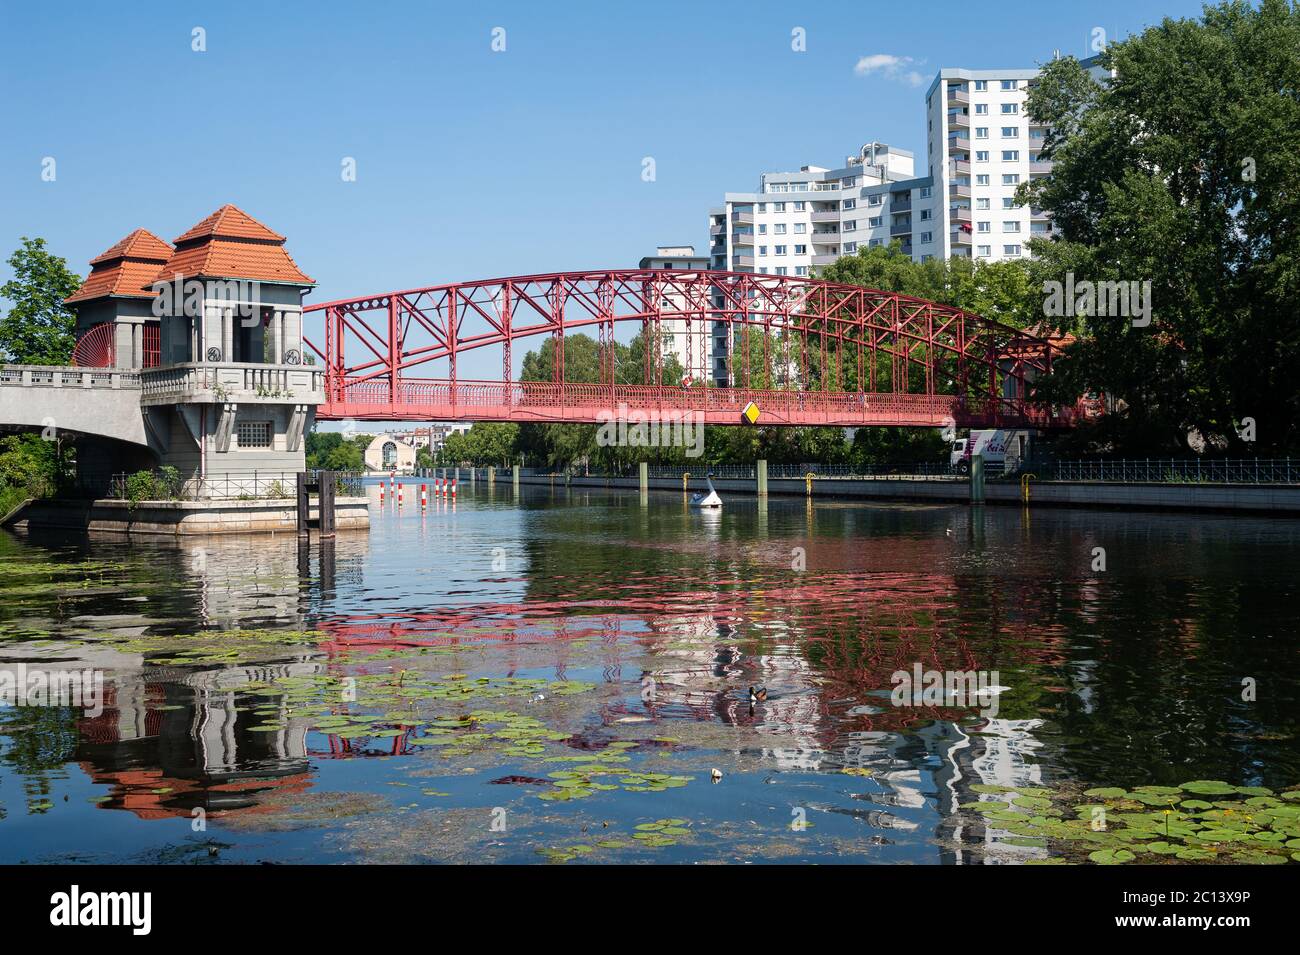 13.06.2019, Berlin, Germany, Europe - The Tegeler Hafenbruecke Bridge (Sechserbruecke) connects both banks at the Tegel canal and Tegel port. Stock Photo